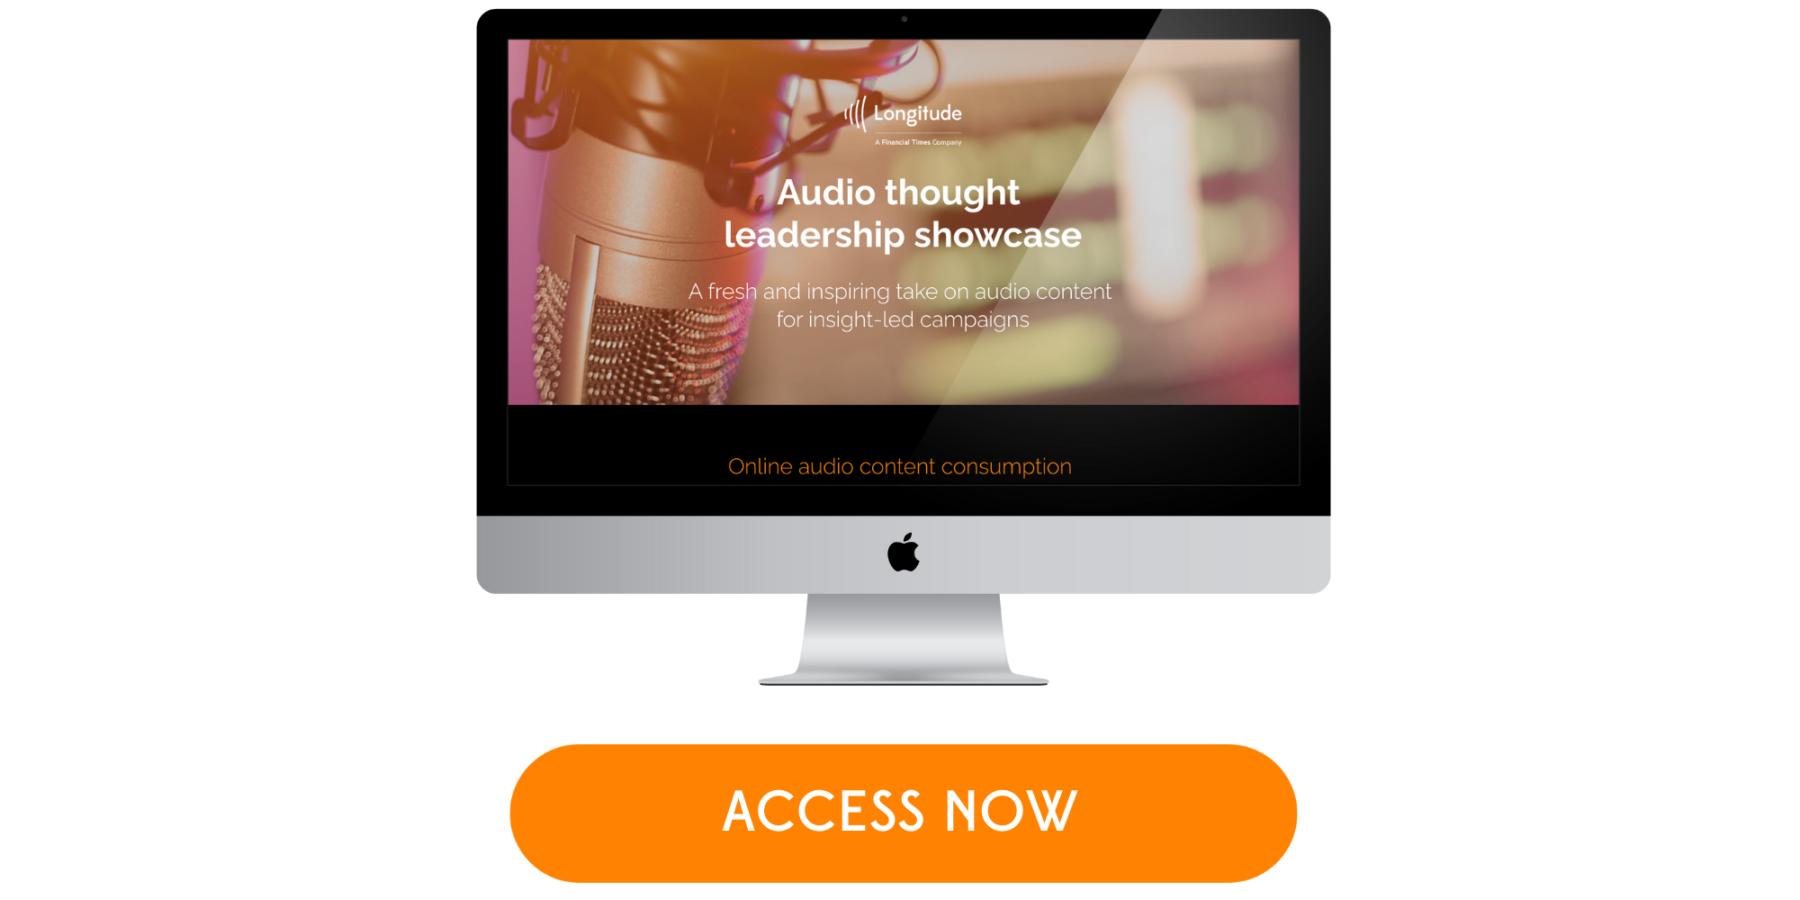 Best-in-class audio thought leadership